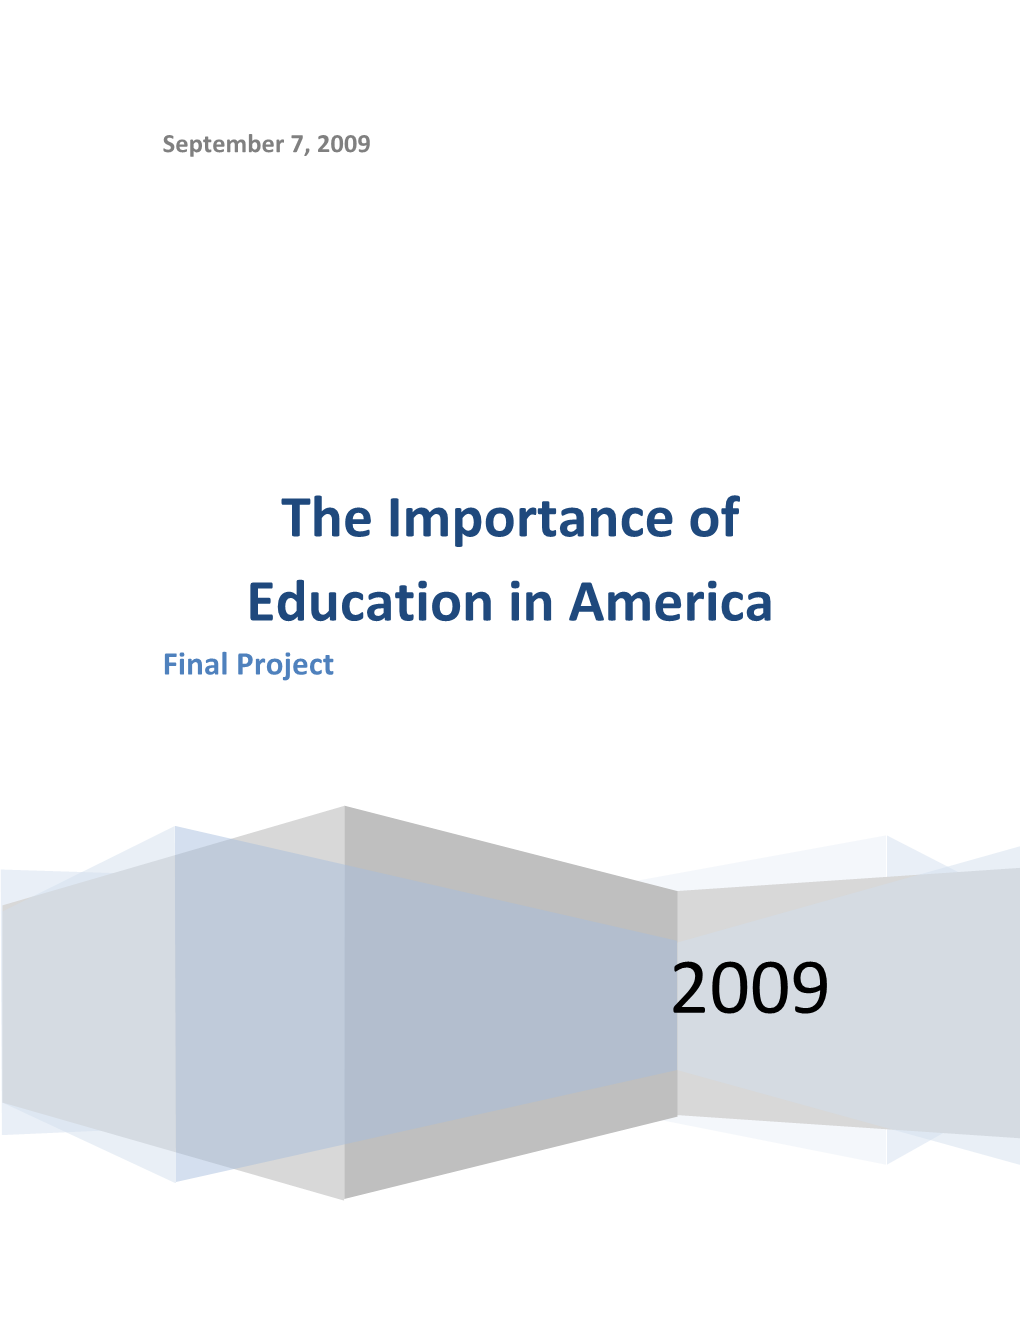 The Importance of Education in America